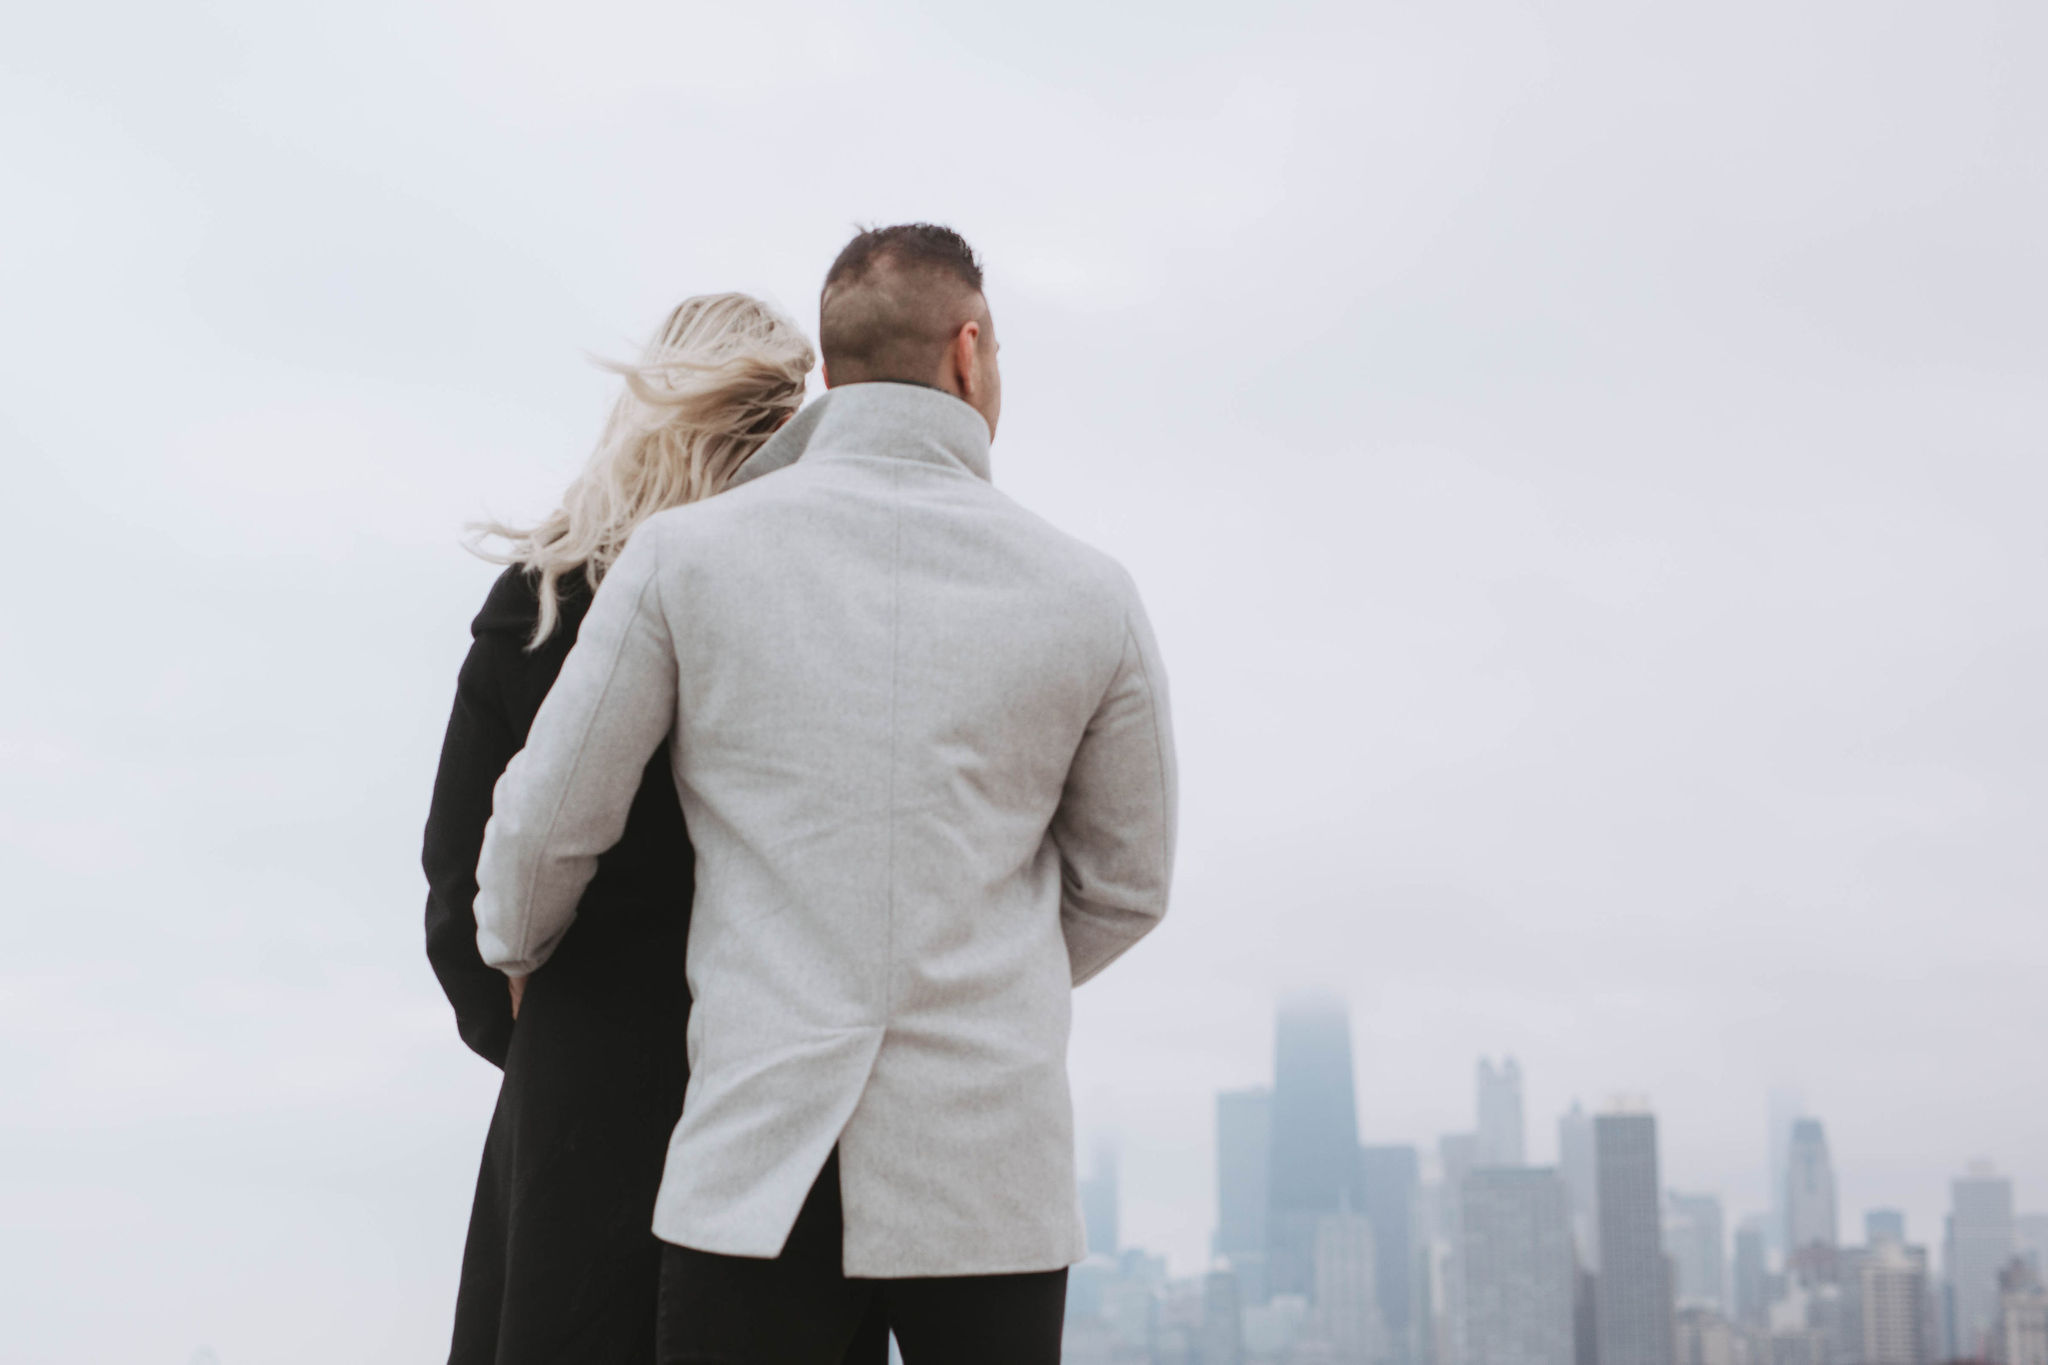 An engaged couple looking out over the city of Chicago during their engagement photo photoshoot